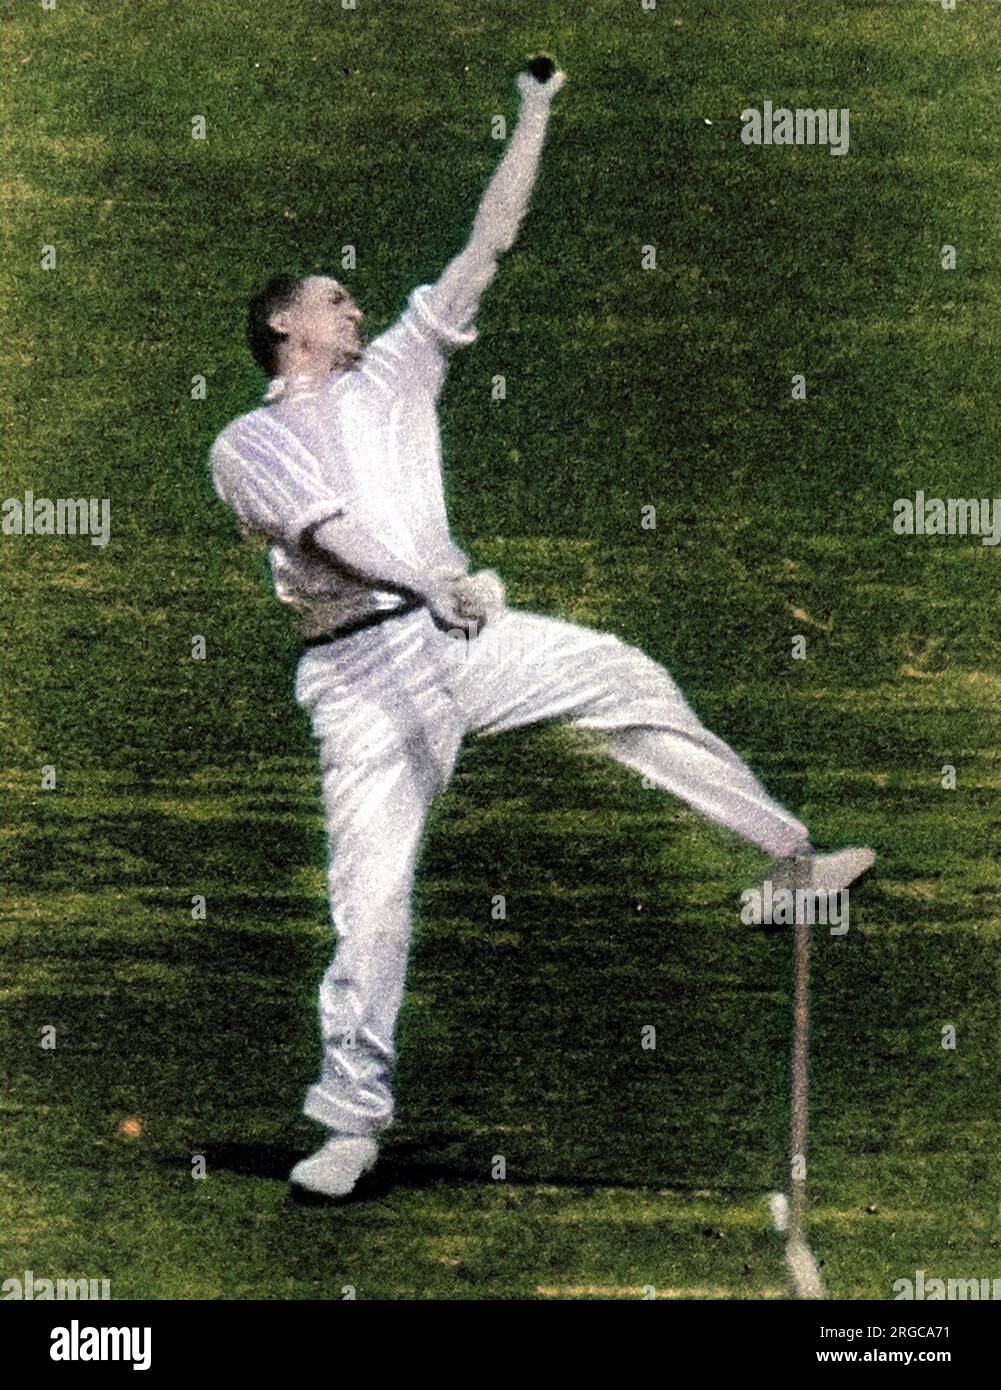 Photograph of the English bowler, Harold Larwood, in action during the MCC tour of Australia, 1933.   During that tour, D.R. Jardine, the MCC Captain, used the pace of Larwood to employ 'leg theory' (also known as 'bodyline' bowling).   Although successful on the cricket field, the tactic was deemed unsportsmanlike by many Australians and soured Anglo-Australian relations. Stock Photo